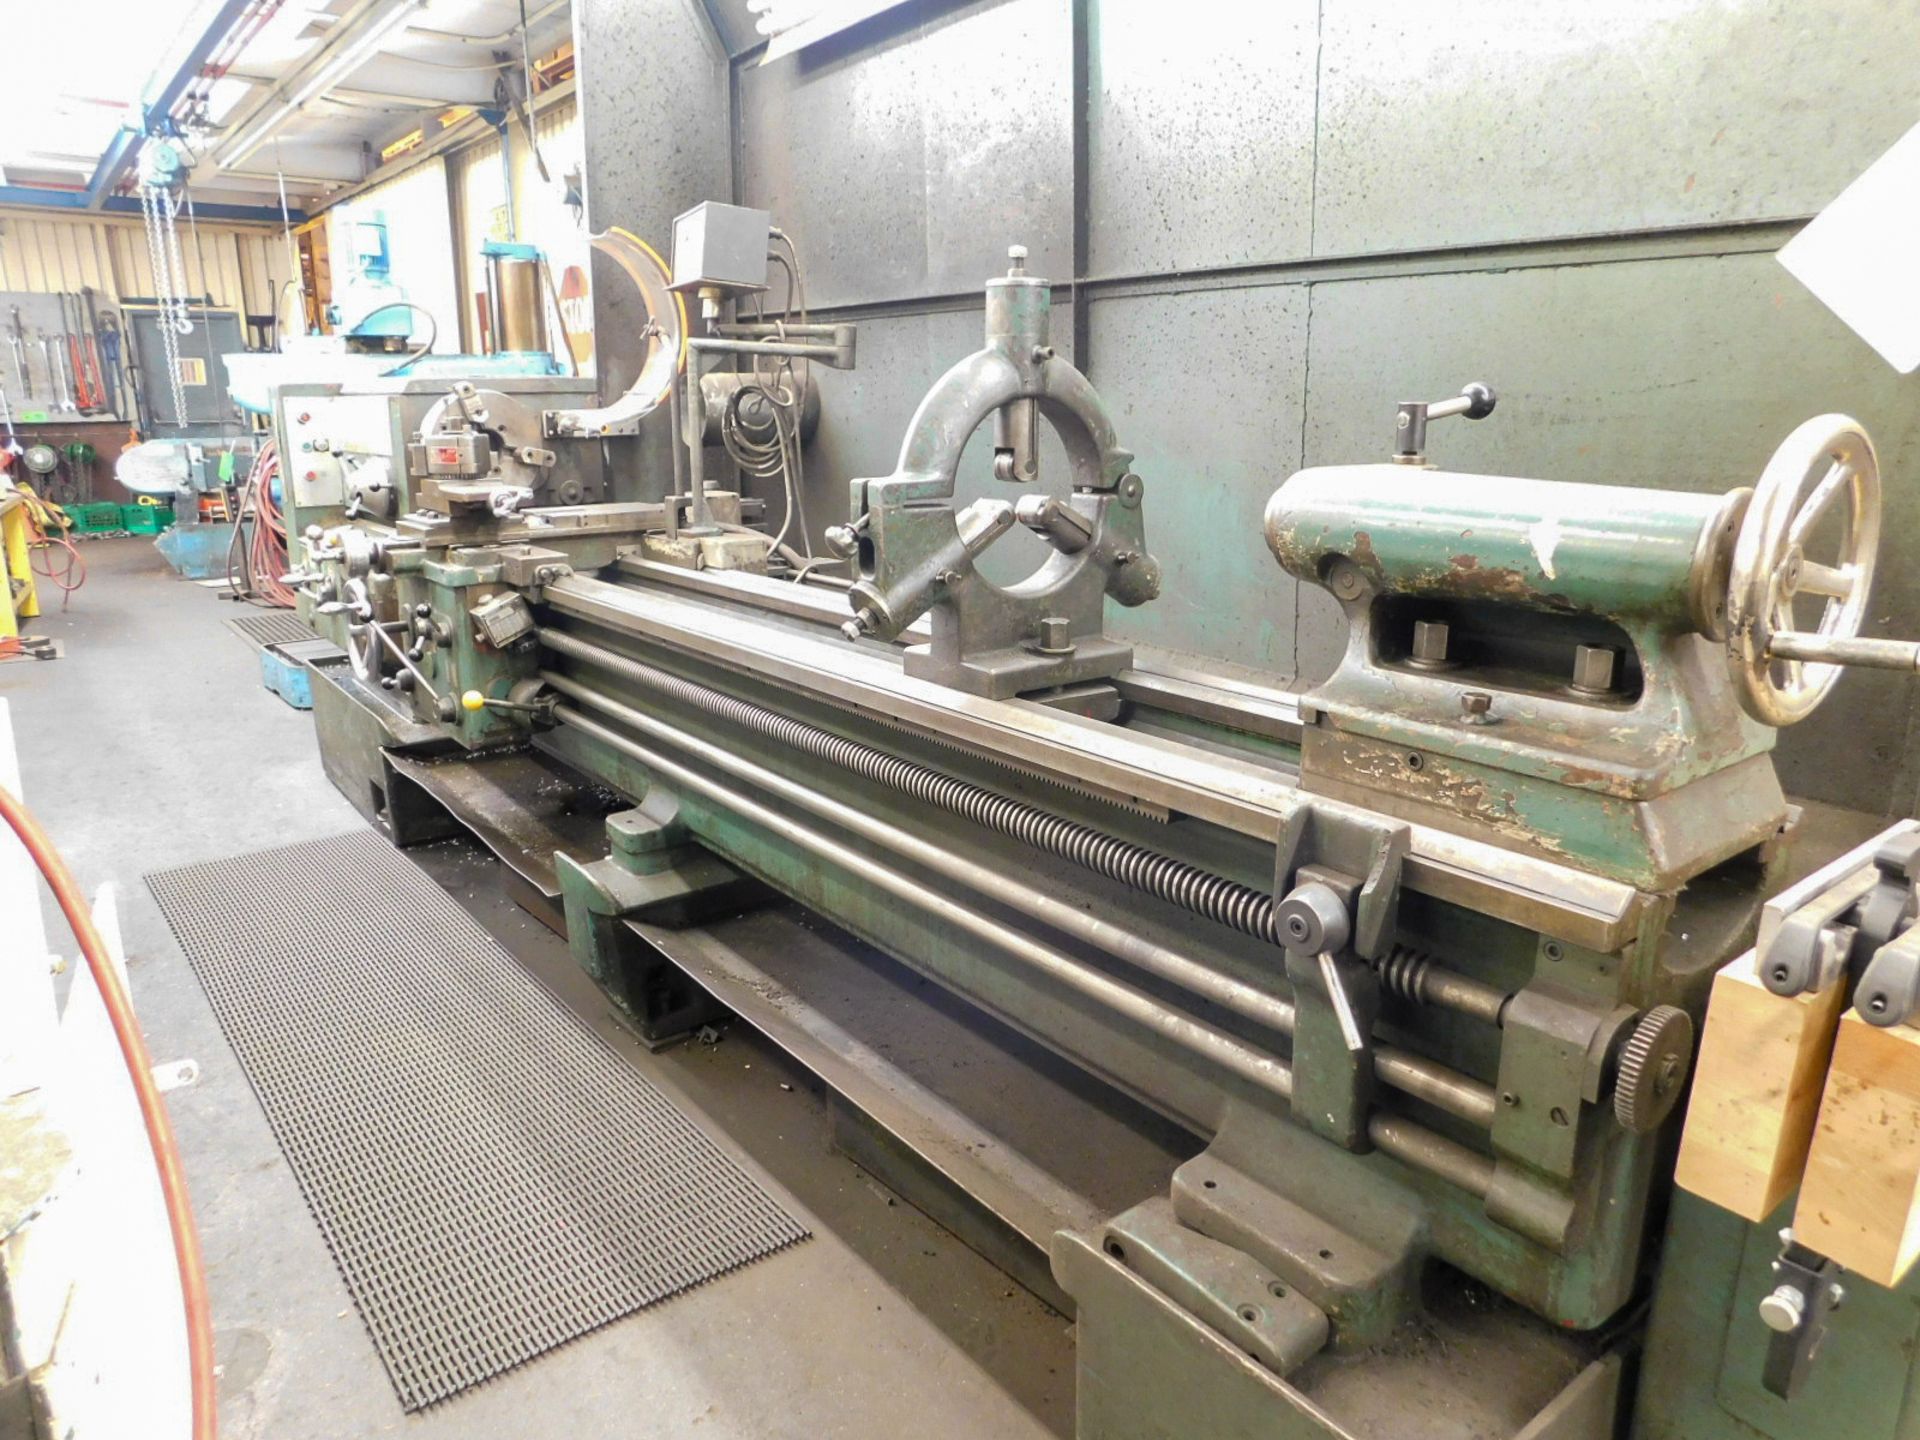 VDF ENGINE LATHE WITH 20" SWING, 106" CENTERS, 35-1800 RPM, 2.5" SPINDLE BORE, TAPER TURNING, INCH/ - Image 2 of 2